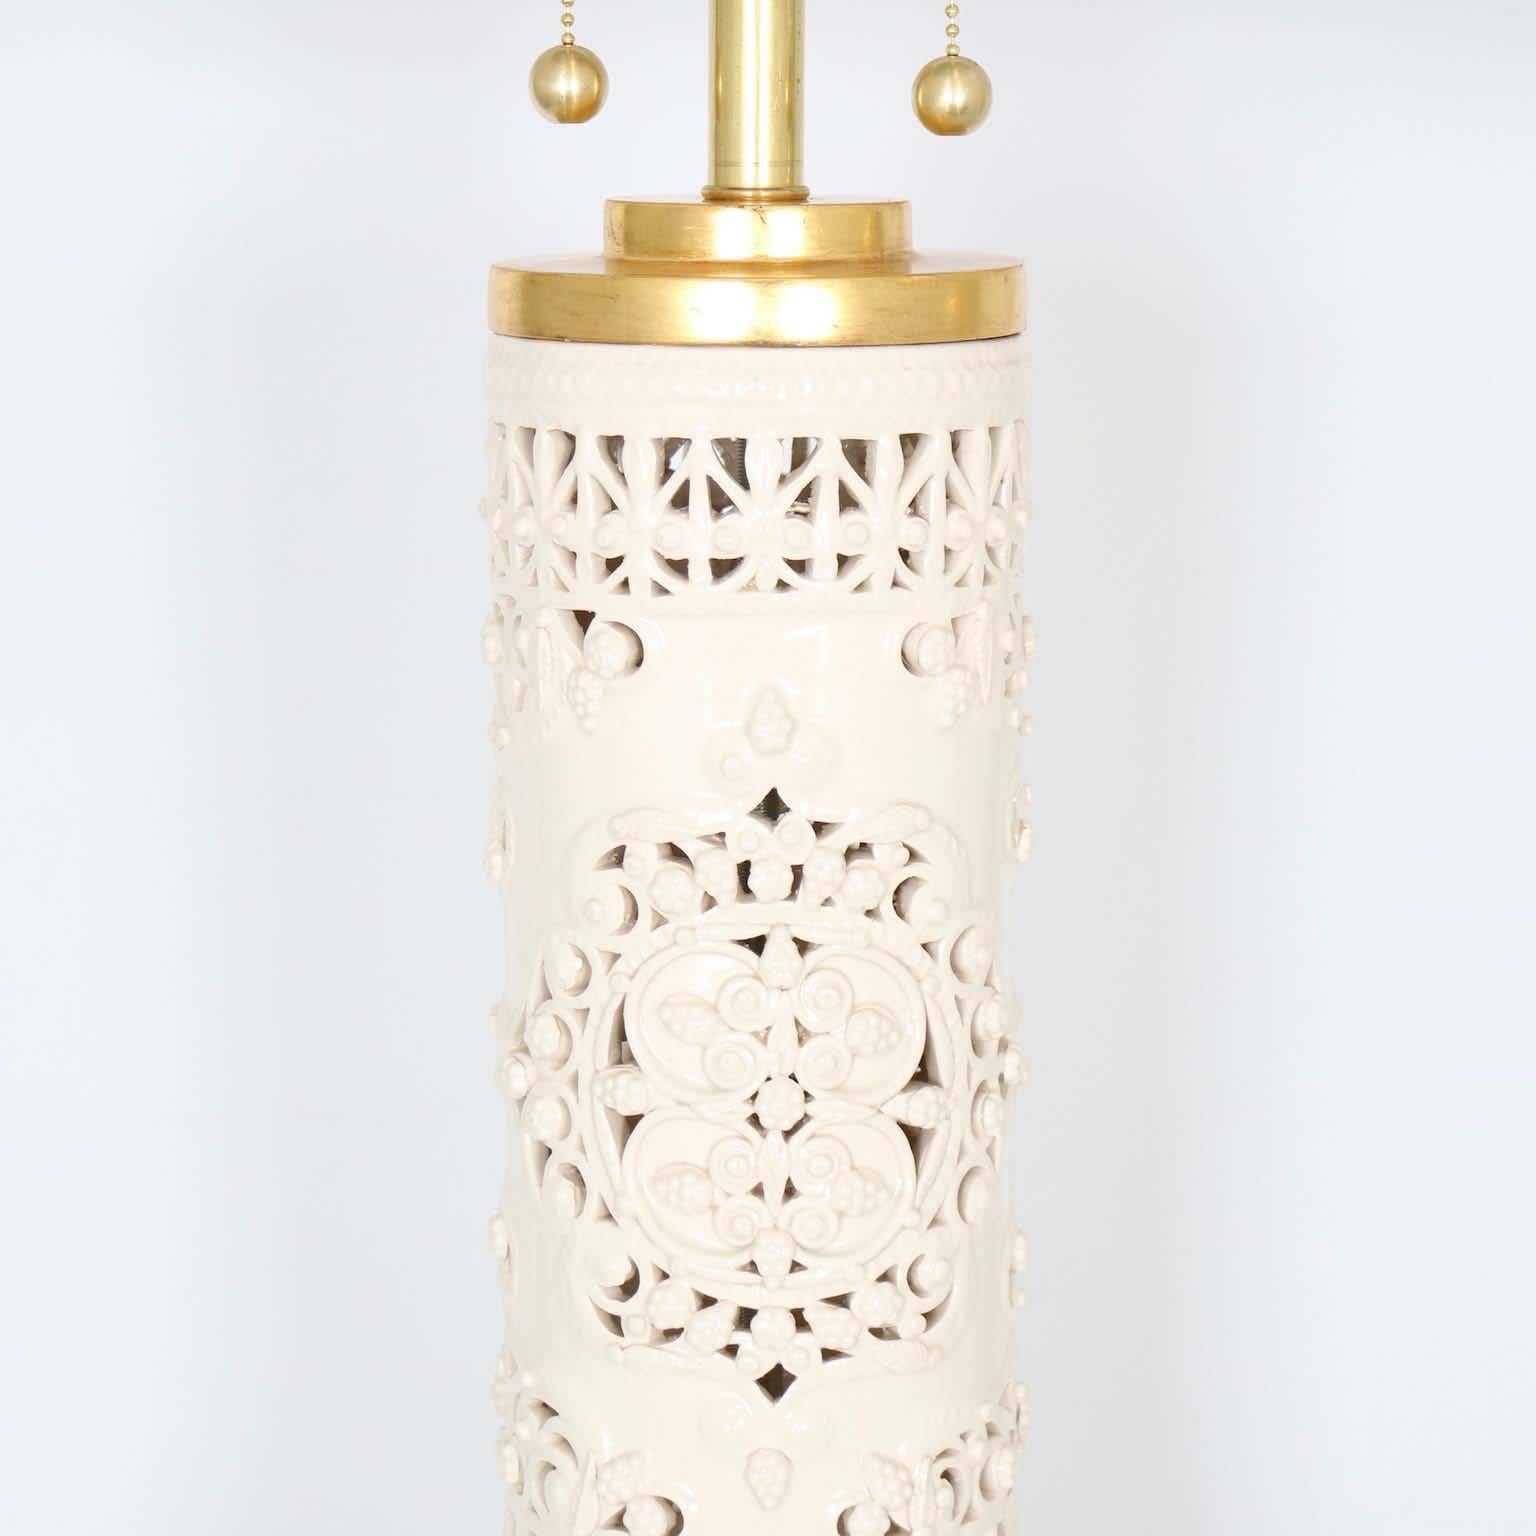 A pair of Hollywood Regency style lamps, produced in Italy, circa 1960s in white ceramic with intricate pierced pattern, caps and bases in gilded wood. The noted height is to the finial. The height to the top of each ceramic body is 25.5″. Fully